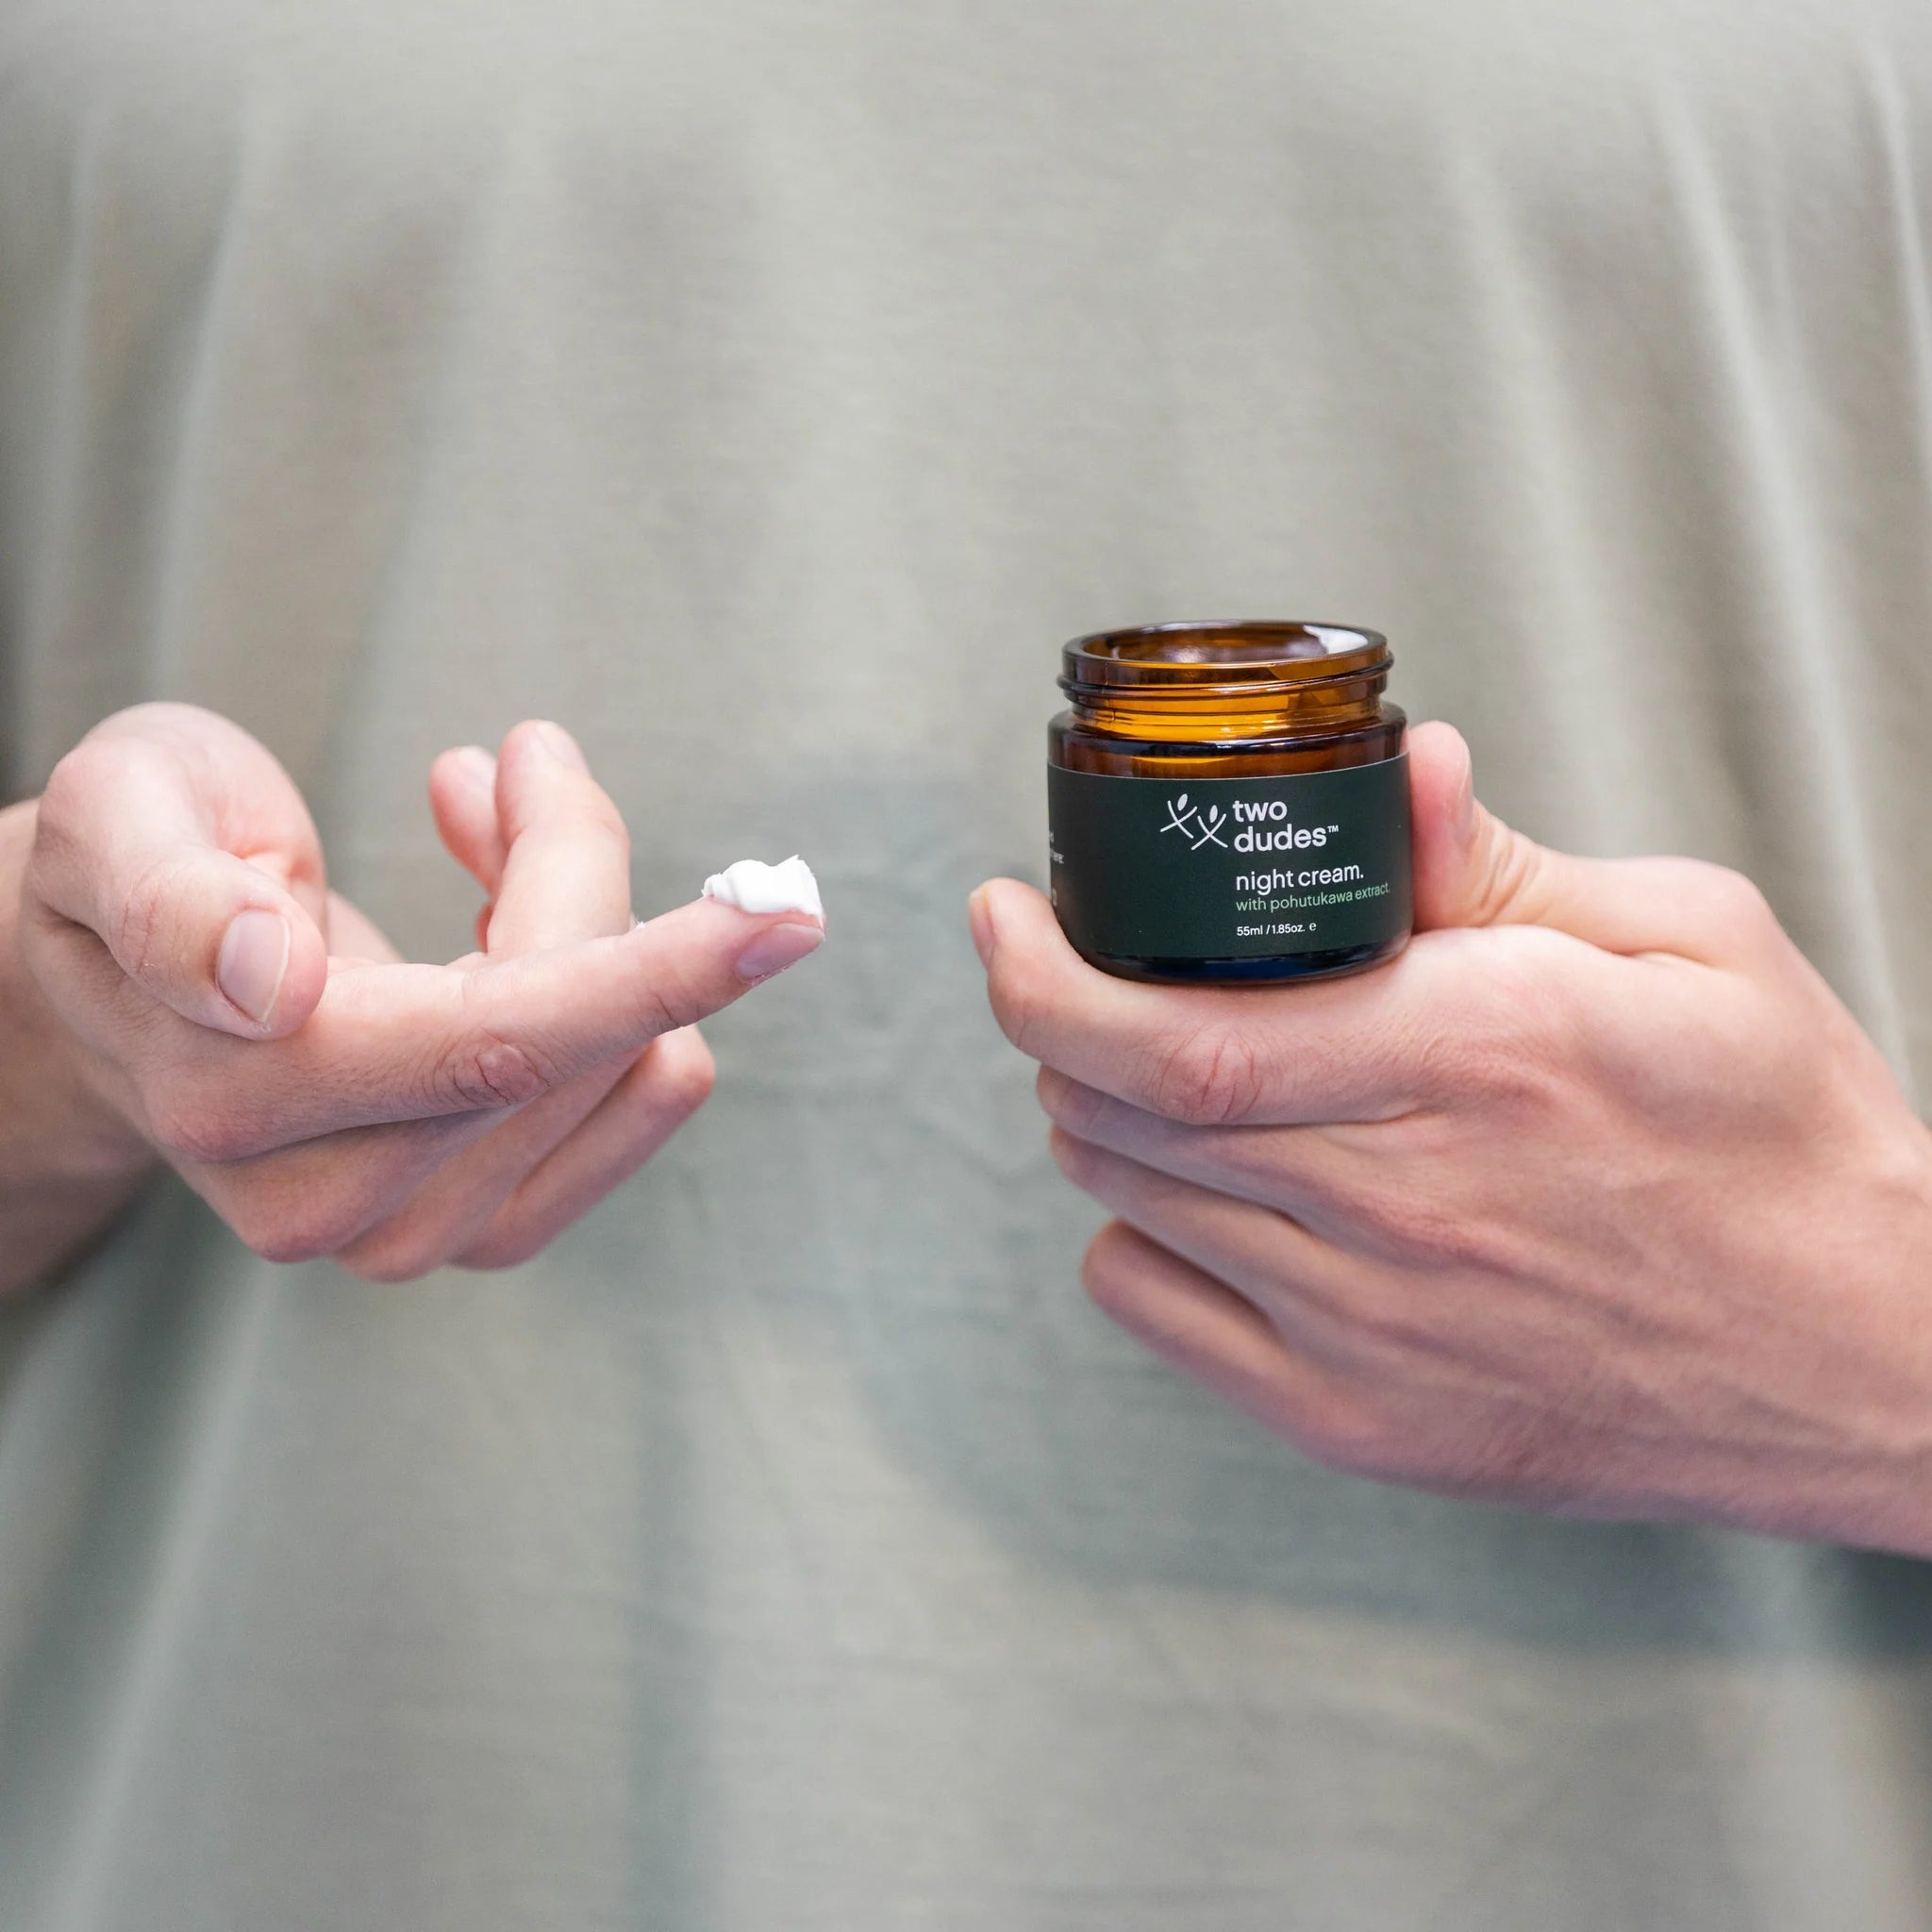 A person applying a dab of Night Cream by Two Dudes from a small jar labeled "Two Dudes" onto their fingertip.